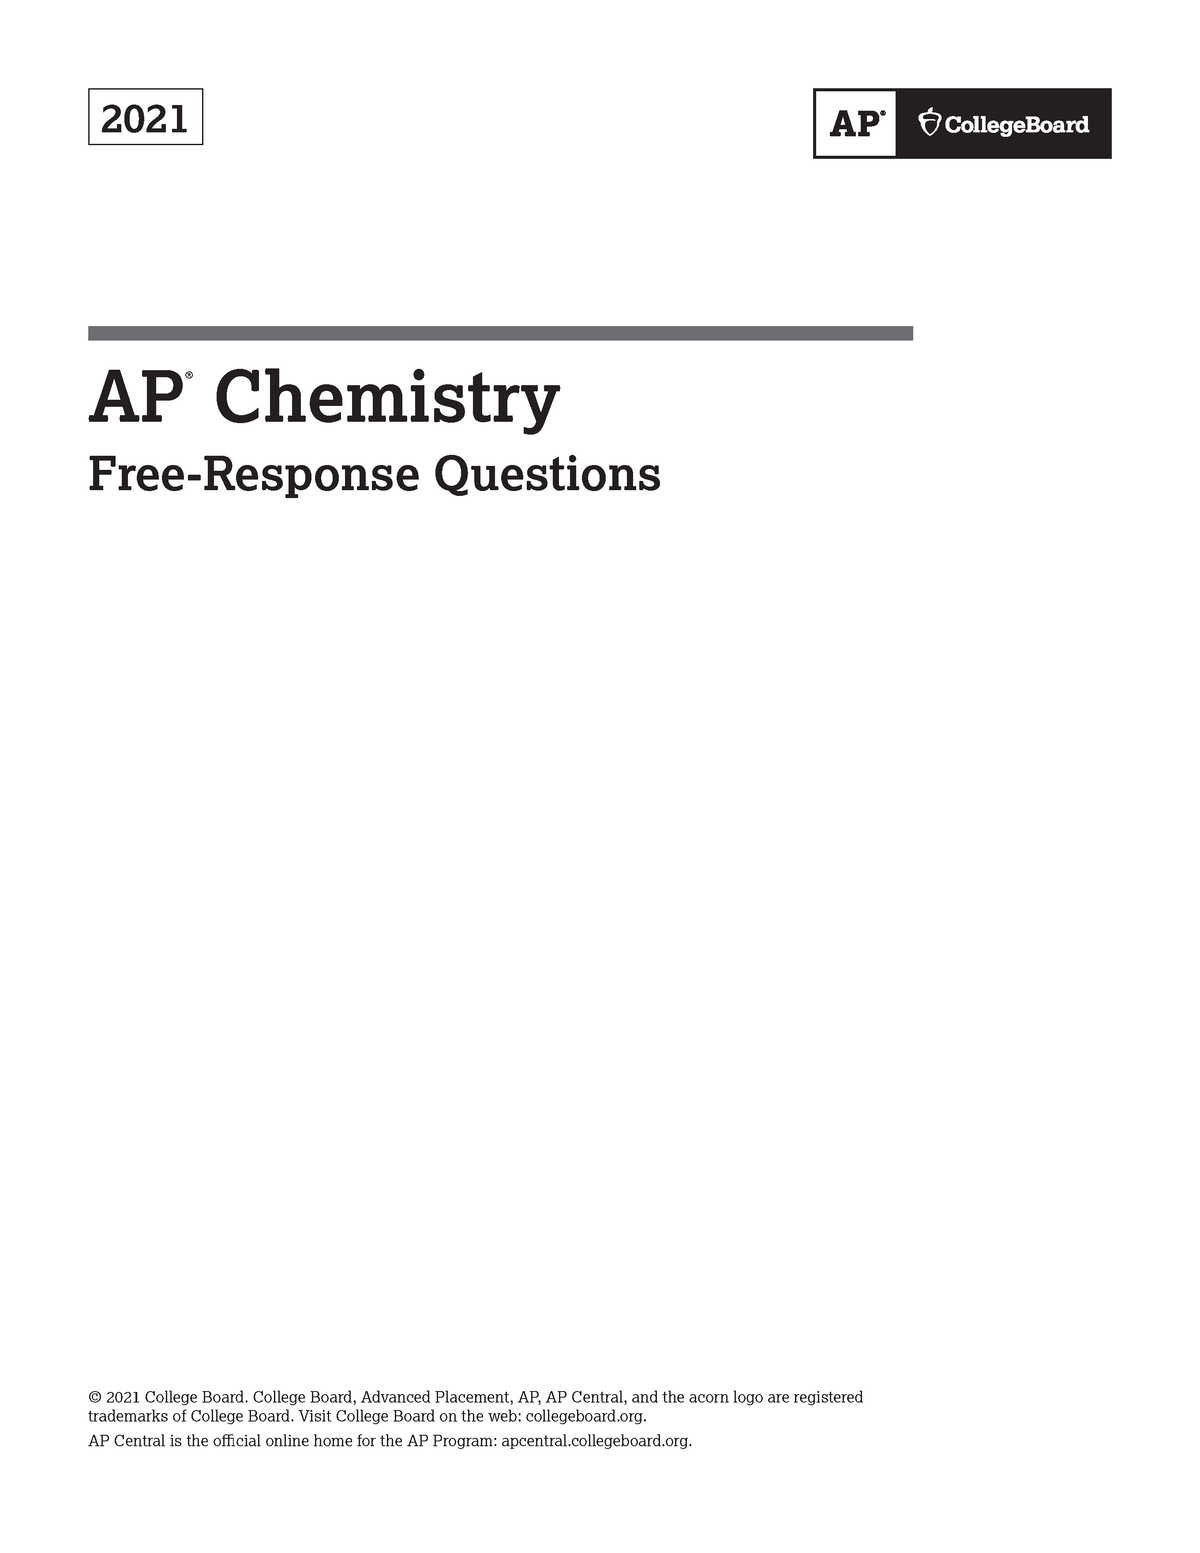 Ap21frqchemistry chemistry free response questions 2021 AP